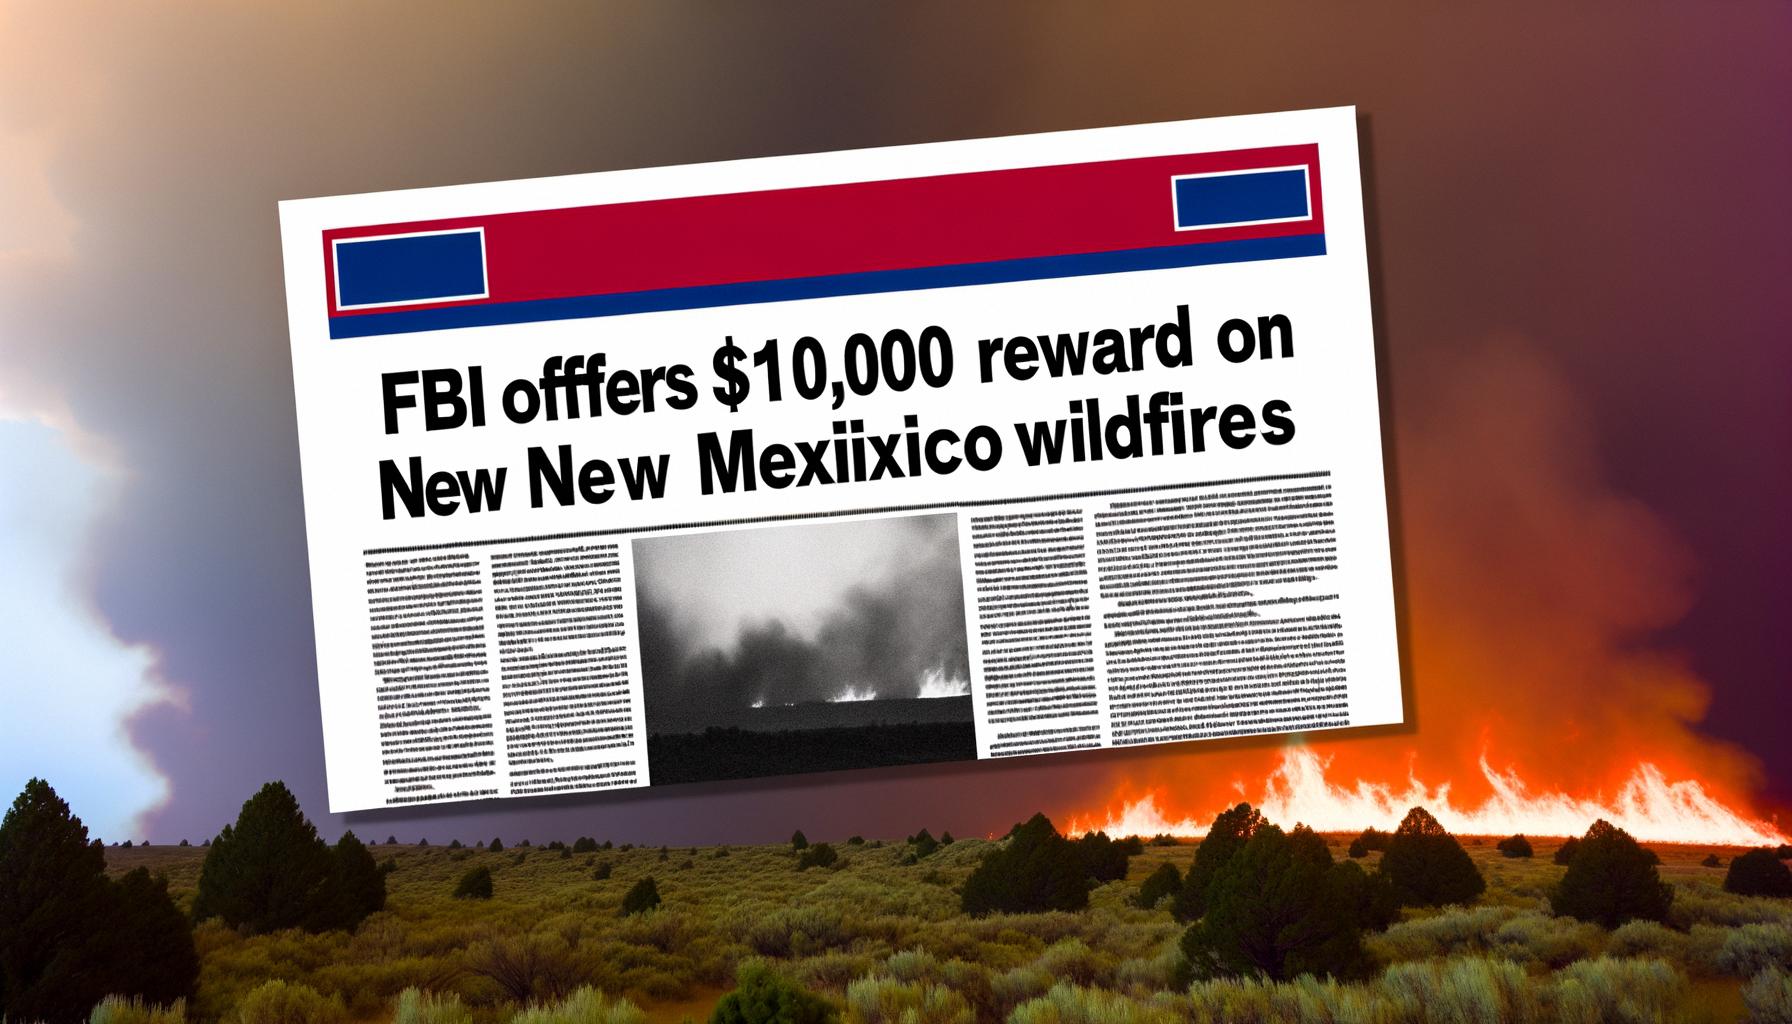 FBI offers $10,000 reward for information on New Mexico wildfires Balanced News